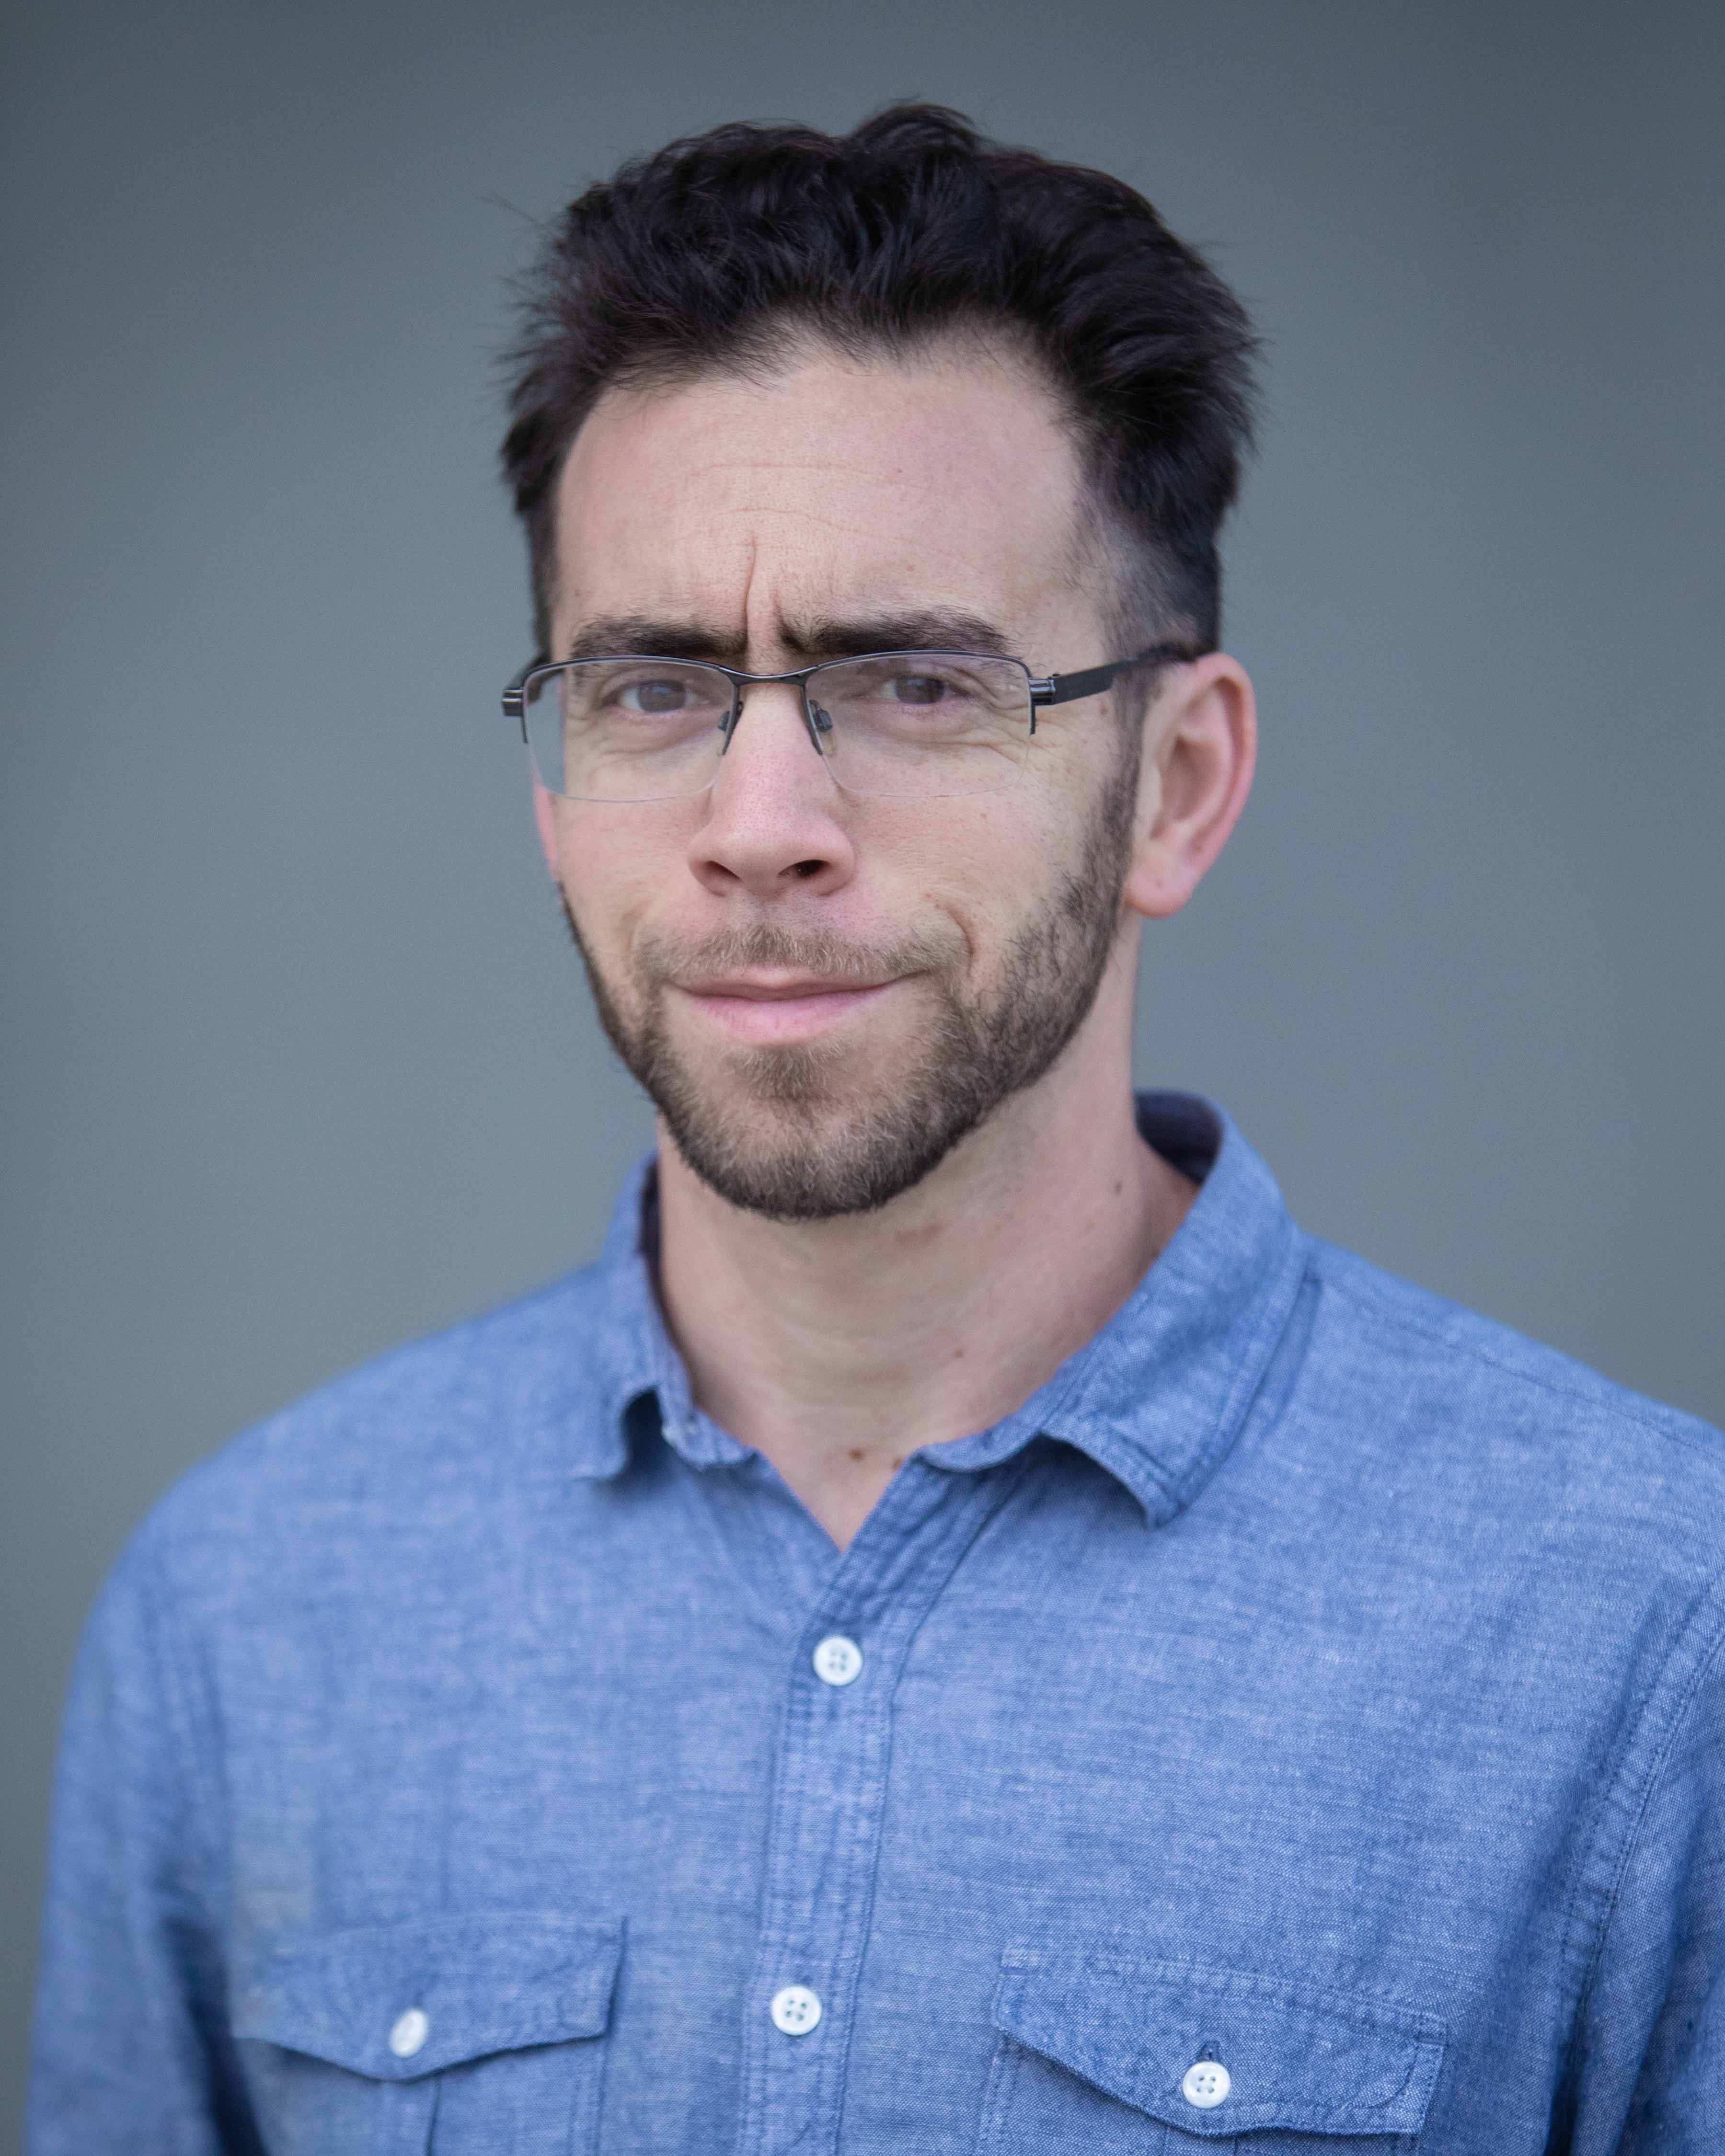 Tony Marks-Block, close-cropped dark beard and dark hair with glasses, wearing a blue shirt, in a shoulders-up portrait against a gray background